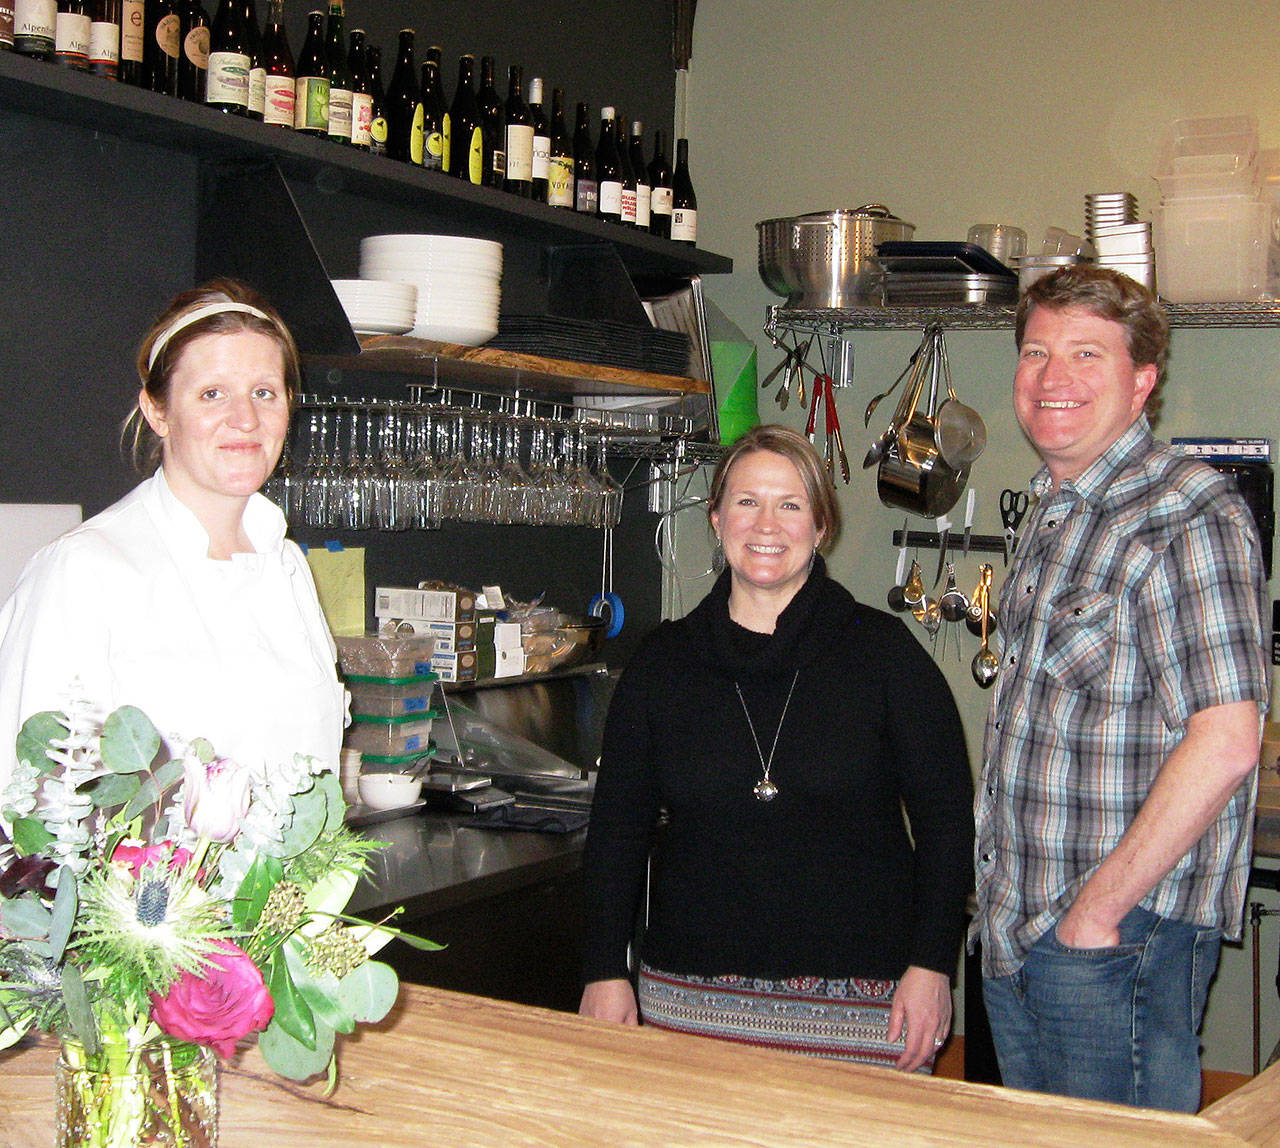 Chef Maggie McGovern-Tu, left, prepares food at Farmer and the Vine wine bar in Bayview. Owners Jen and Josh Peters look on. (Photo by Dave Felice)